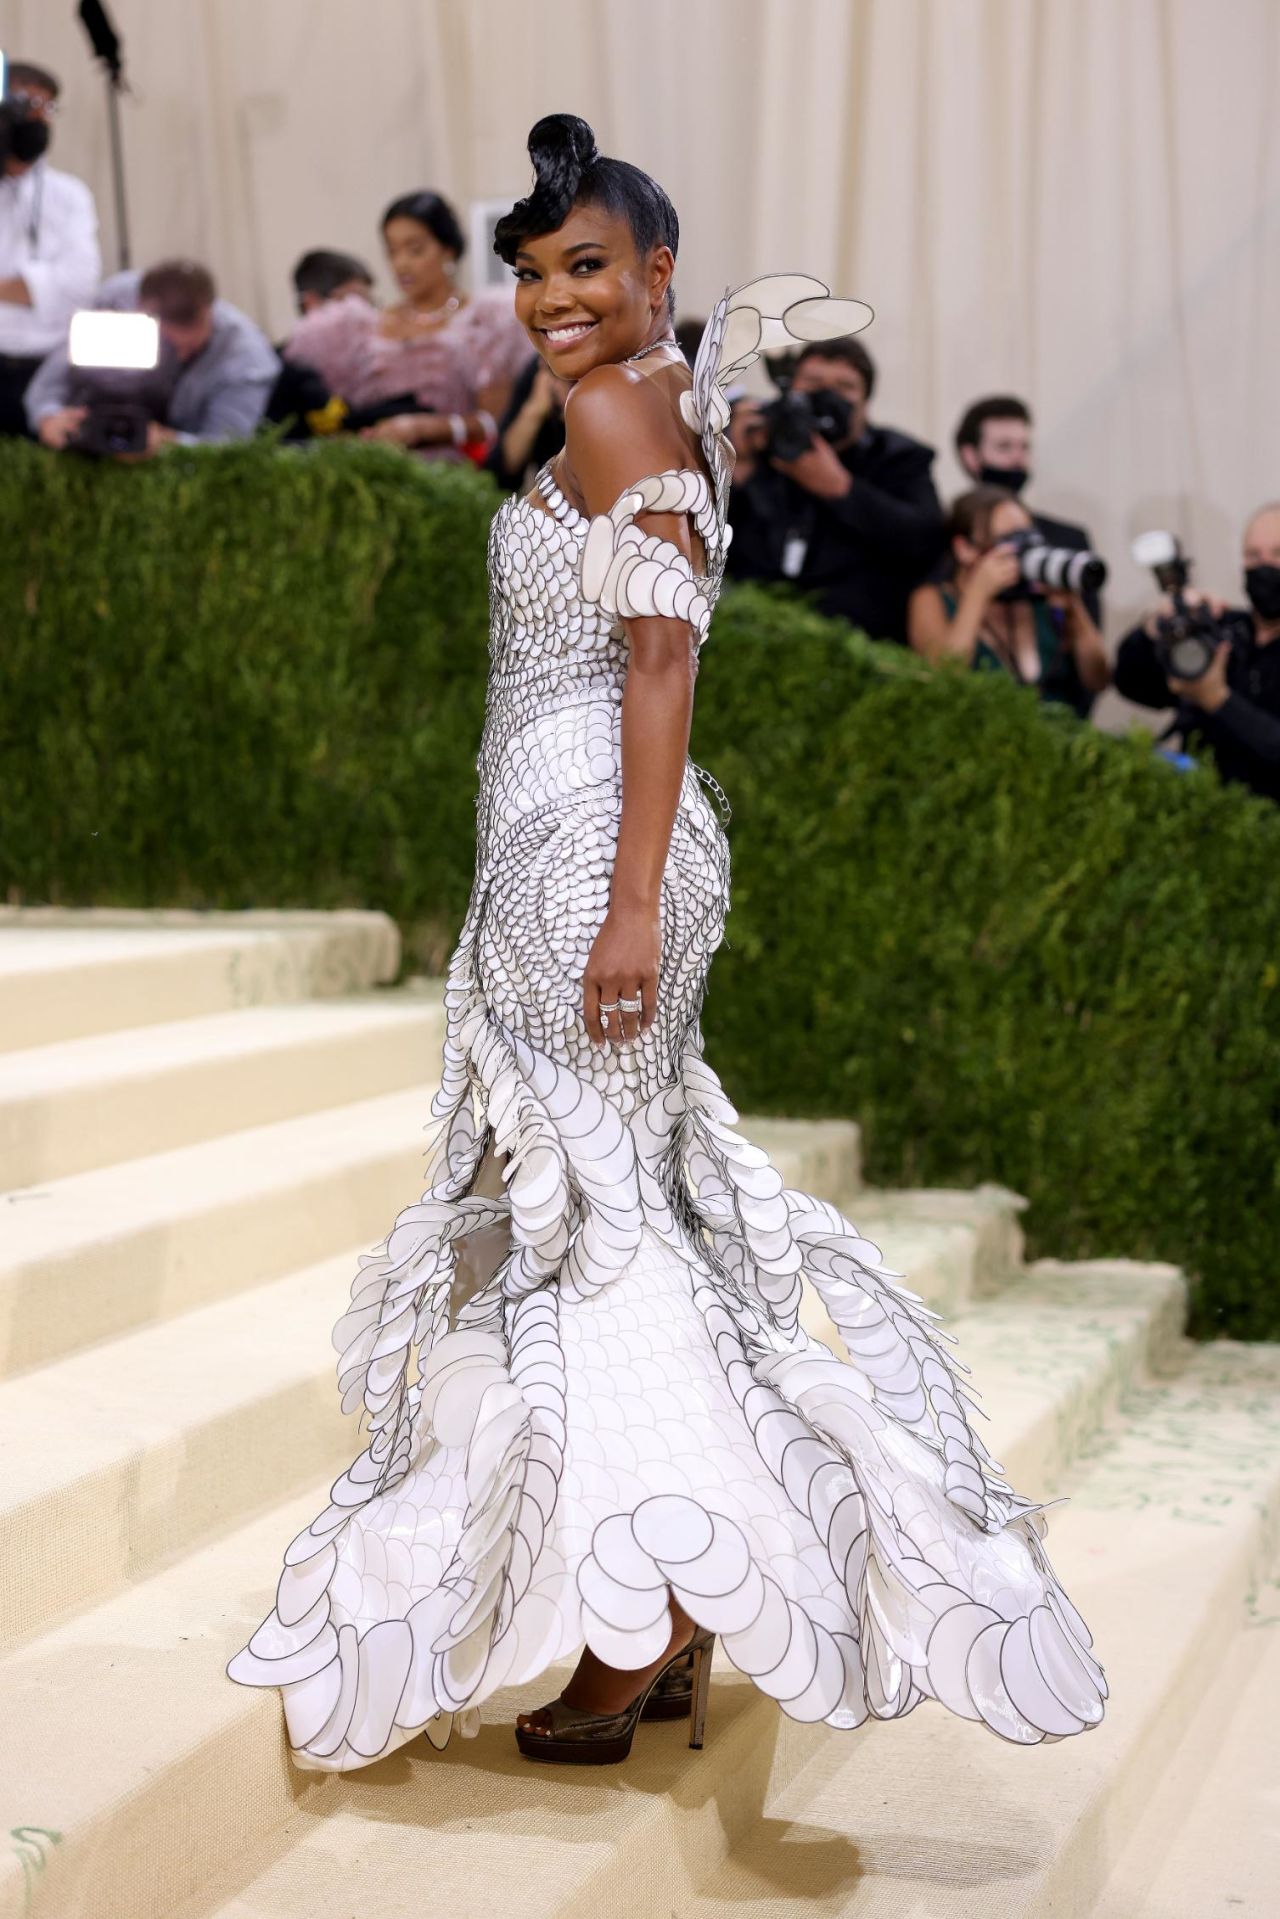 Actress Gabrielle Union wore a custom sculptural gown by designer Iris Van Herpen.  Made from over 10,000 laser cut 'liquid' fabric spheres, the dress took over 1,400 hours to create.